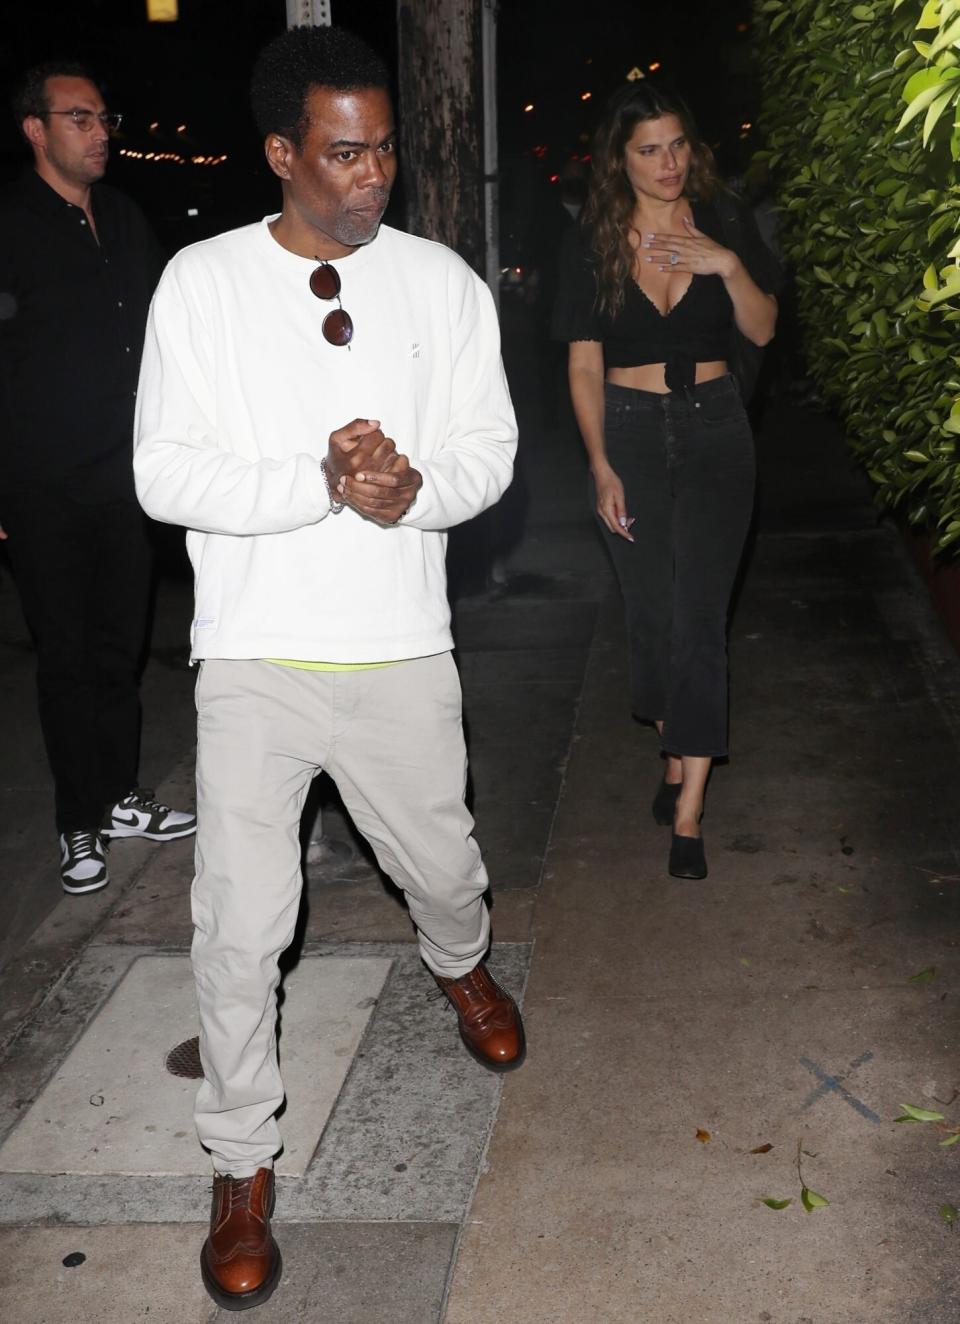 *PREMIUM-EXCLUSIVE* Santa Monica, CA - Comedian Chris Rock and actress Lake Bell are seen having a romantic dinner date at Italian restaurant Giorgio Baldi on the 4th of July weekend in Santa Monica. The duo arrived at 8:45 PM and left the establishment at 10:30 PM. The 57-year-old comedian kept it casual in a white long sleeve shirt, grey pants, and brown dress shoes while actress Lake Bell wore black jeans, black dress shoes, and a black top showing off a little bit of her cleavage. At one point, the couple was holding hands as they arrived at the restaurant but immediately let go of each other as soon as they saw the photographers. It’s been a little over 3 months since Chris Rock was slapped by actor Will Smith on stage in front of an audience and on live television at the 2022 Oscars. Chris and Lake were recently spotted together last month at Busch Stadium in St. Louis, watching a Cardinals game. Pictured: Chris Rock, Lake Bell BACKGRID USA 4 JULY 2022 BYLINE MUST READ: TPG / BACKGRID USA: +1 310 798 9111 / usasales@backgrid.com UK: +44 208 344 2007 / uksales@backgrid.com *UK Clients - Pictures Containing Children Please Pixelate Face Prior To Publication*